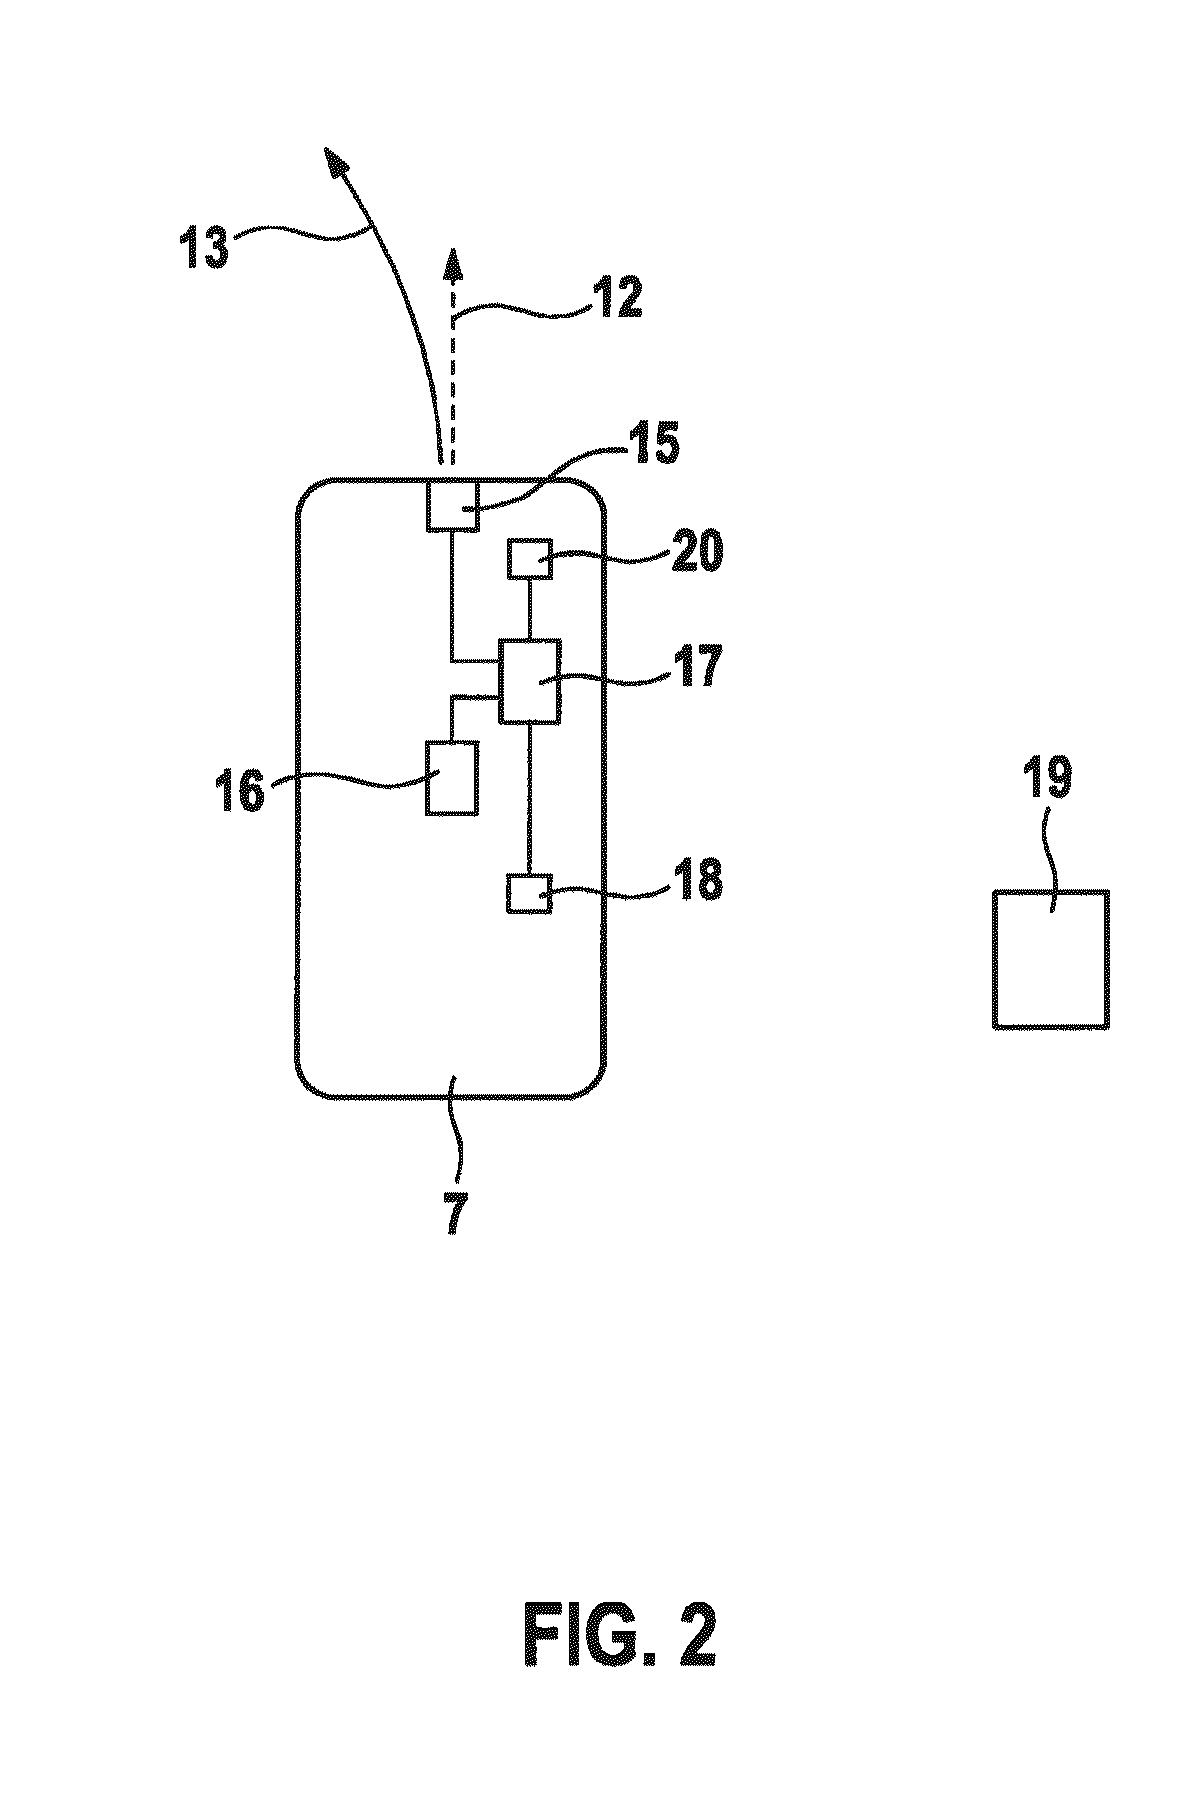 Method and control and detection device for a plausibility check of a wrong-way driving indcident of a motor vehicle